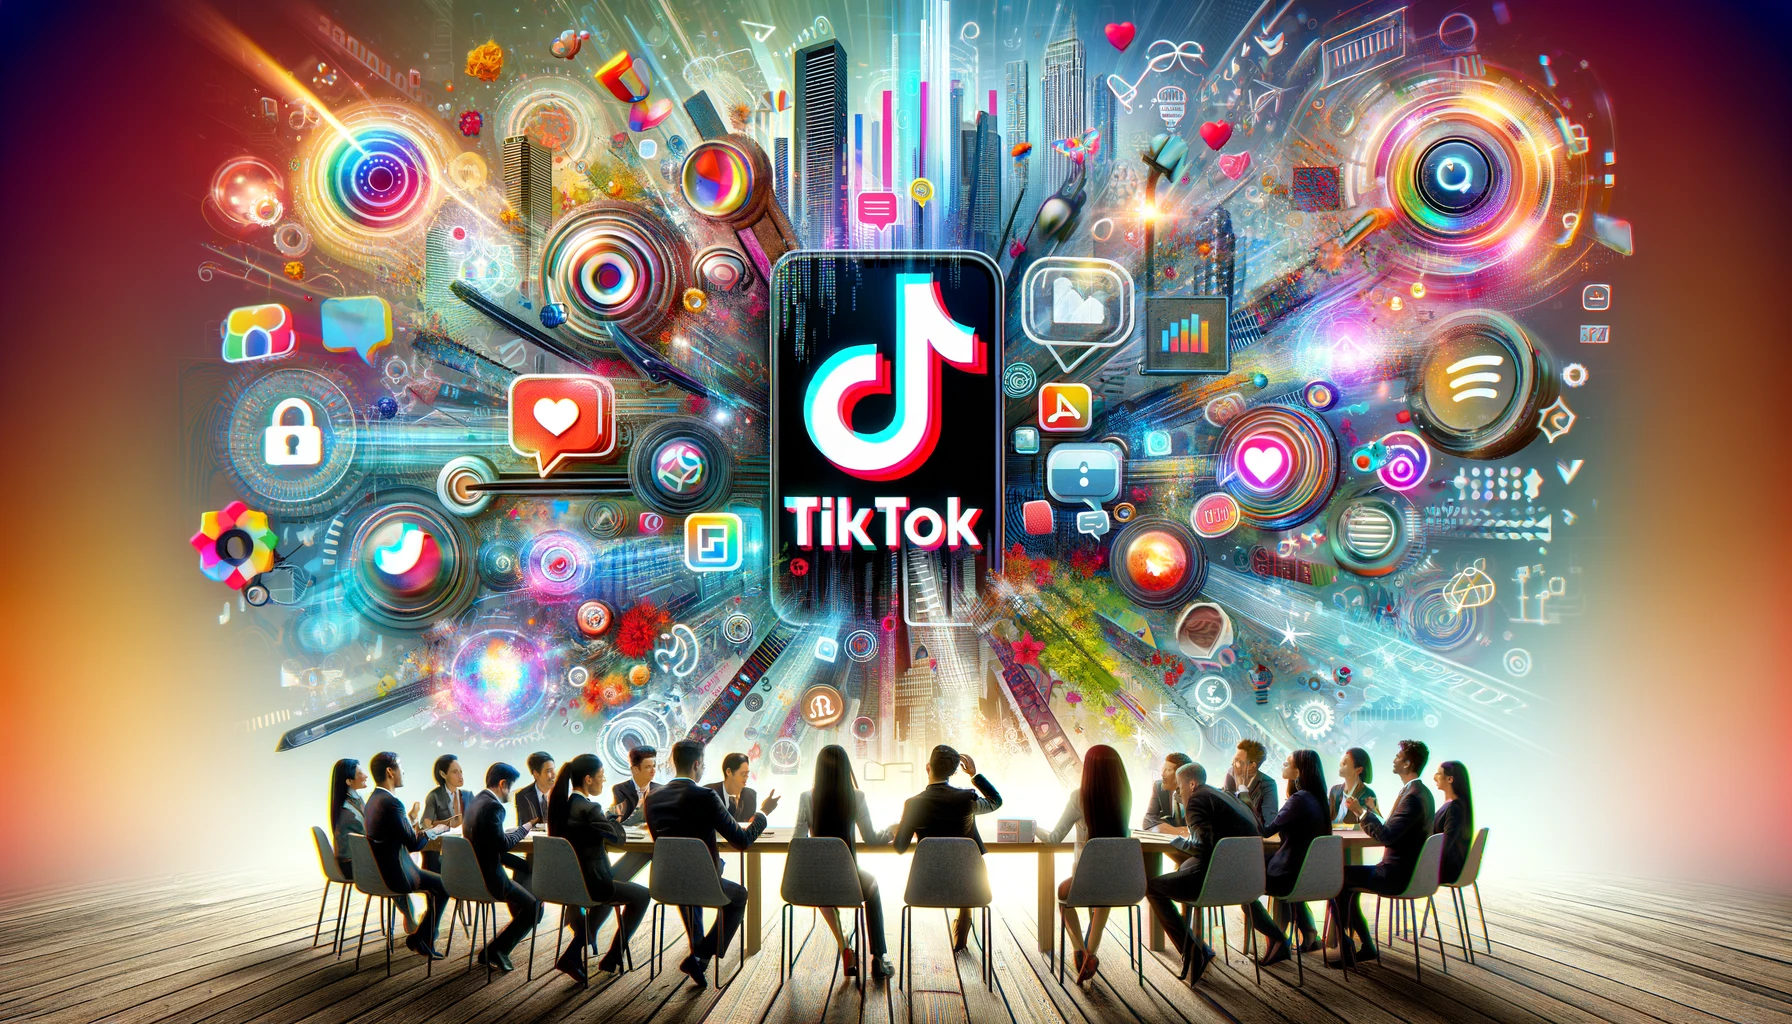 Using TikTok Ads to Their Full Potential: 8 Things to Keep in Mind